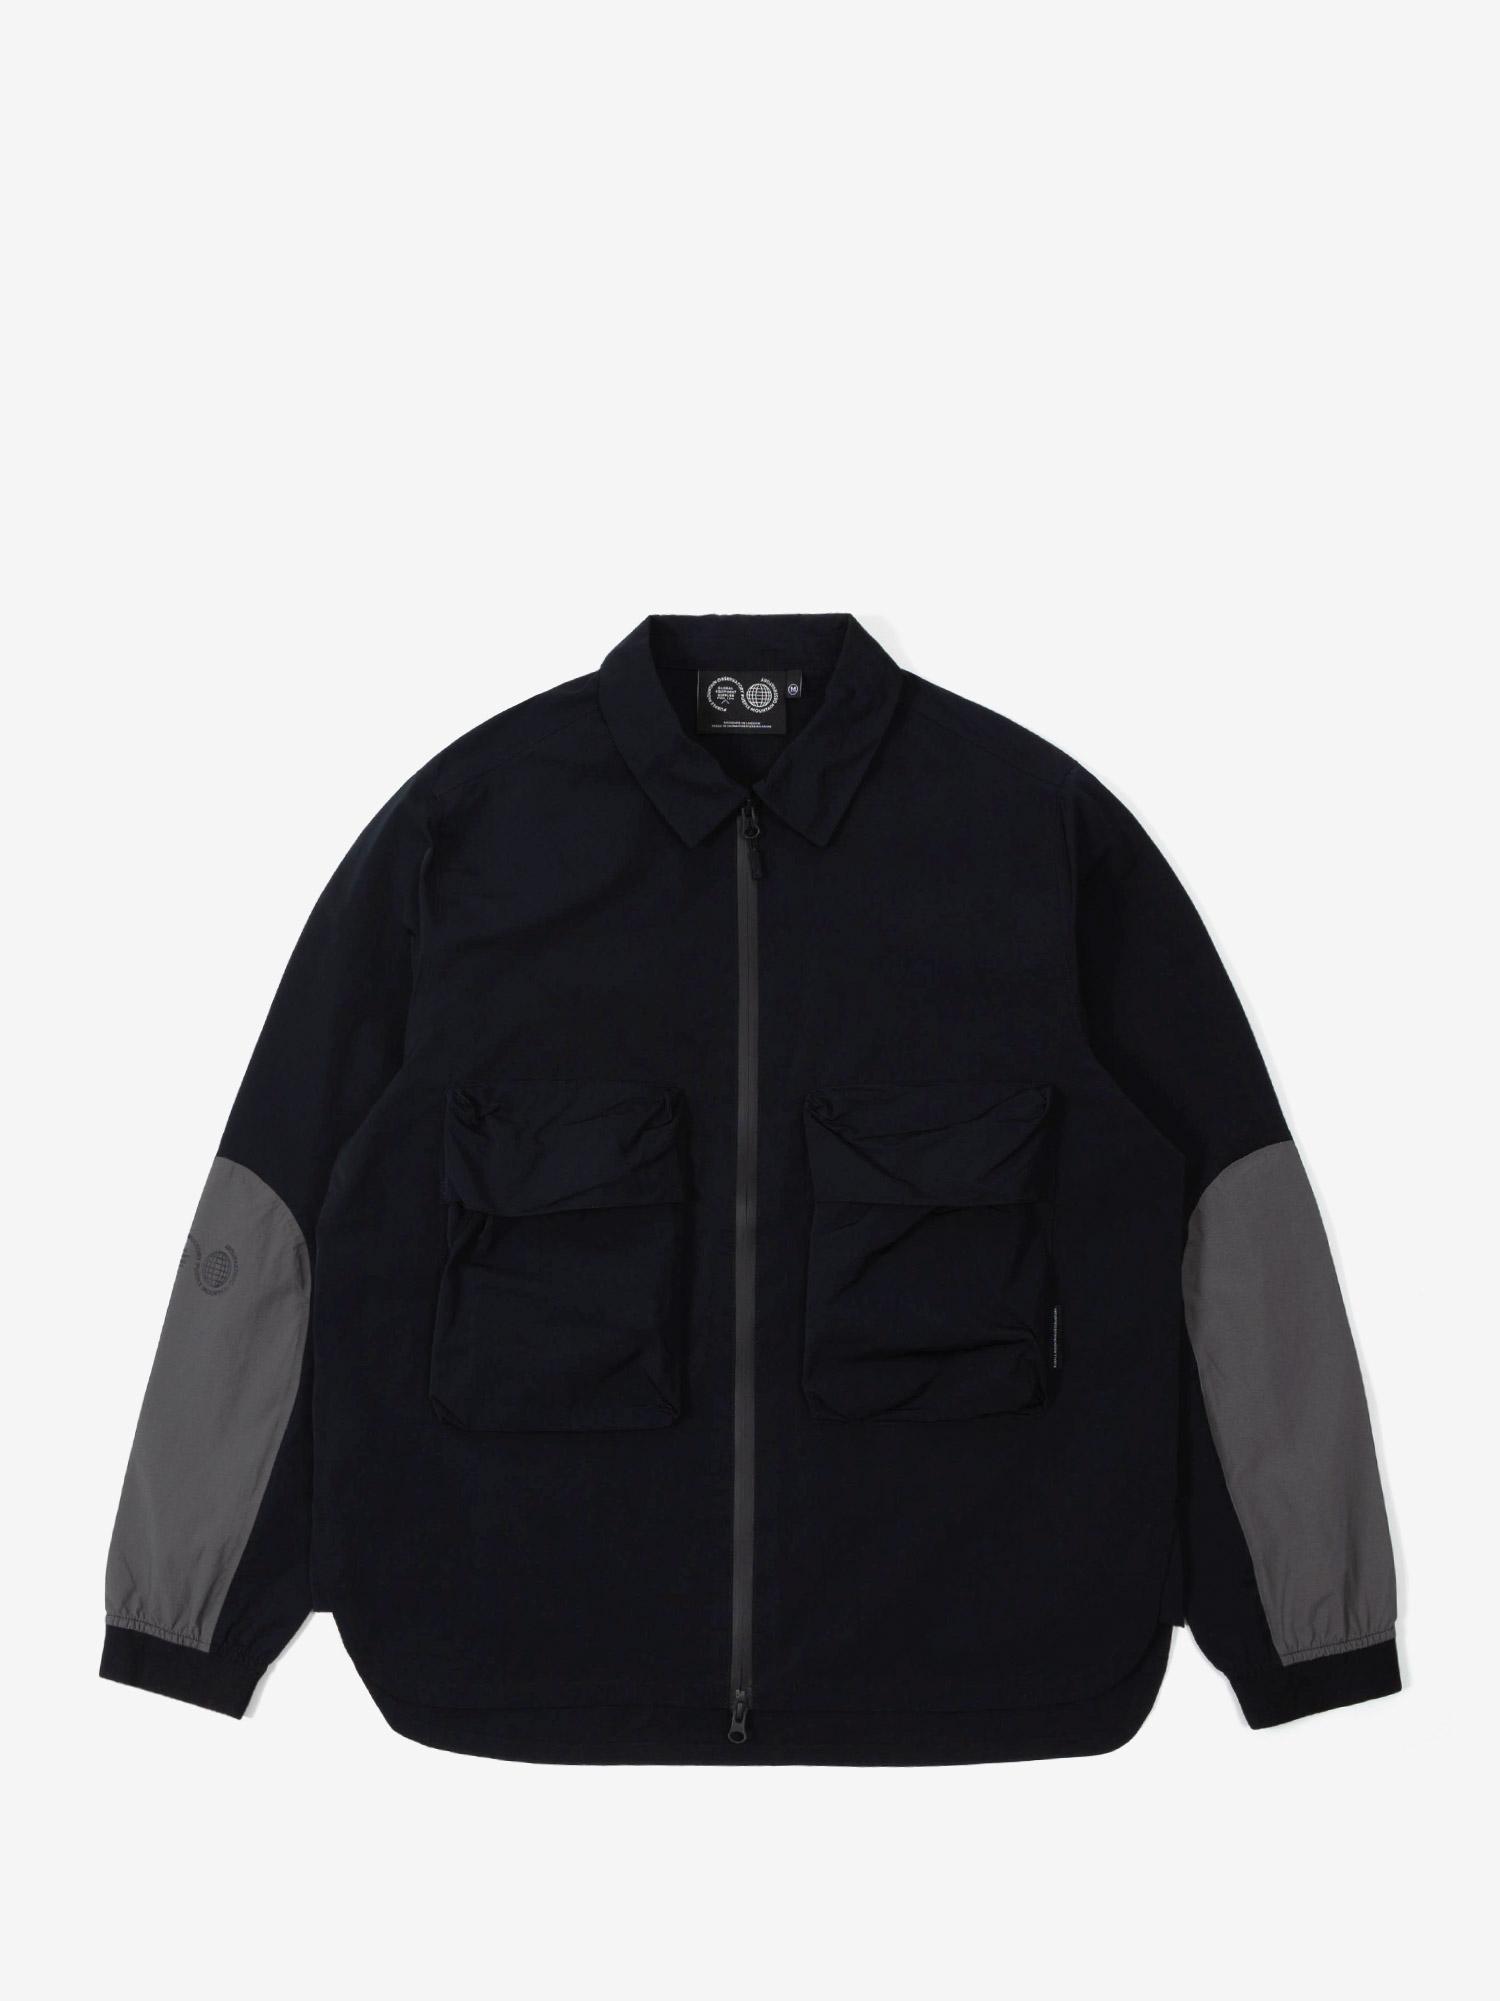 Featured image for “CLIMATE LIGHTWEIGHT JACKET IN BLACK”